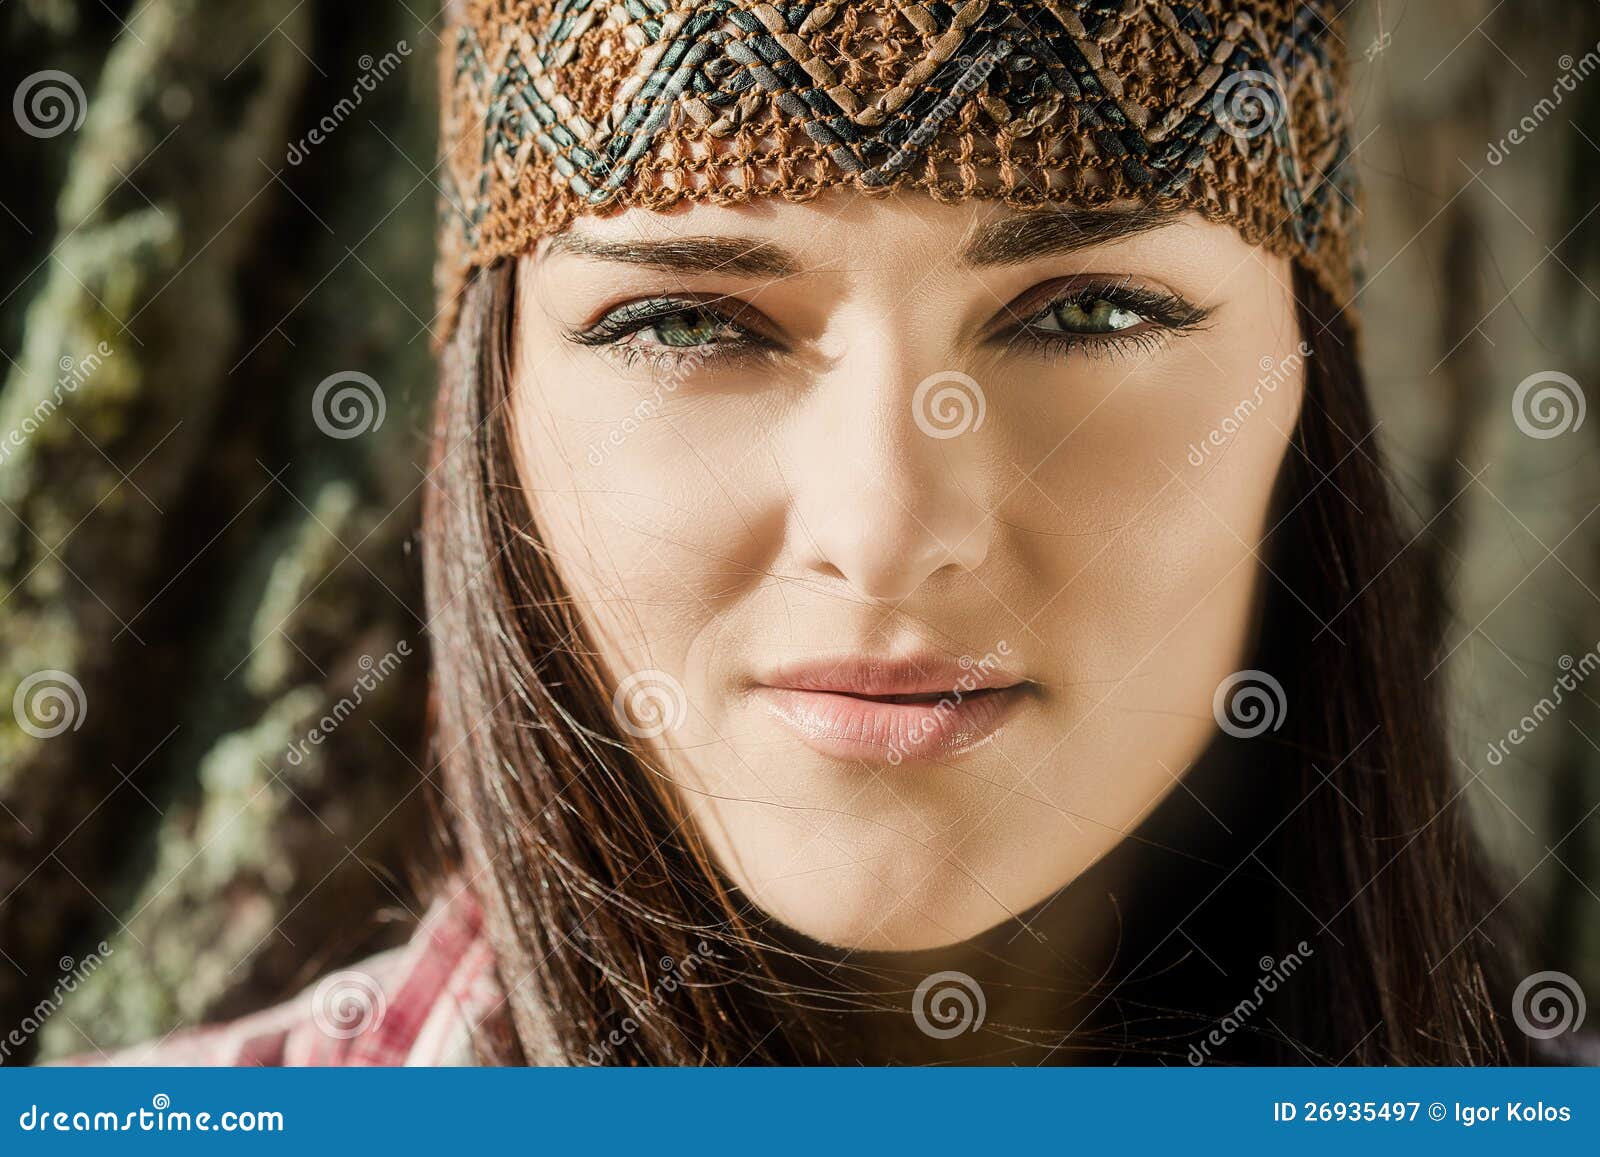 Beautiful hippie girl stock image. Image of musical, outdoors - 26935497